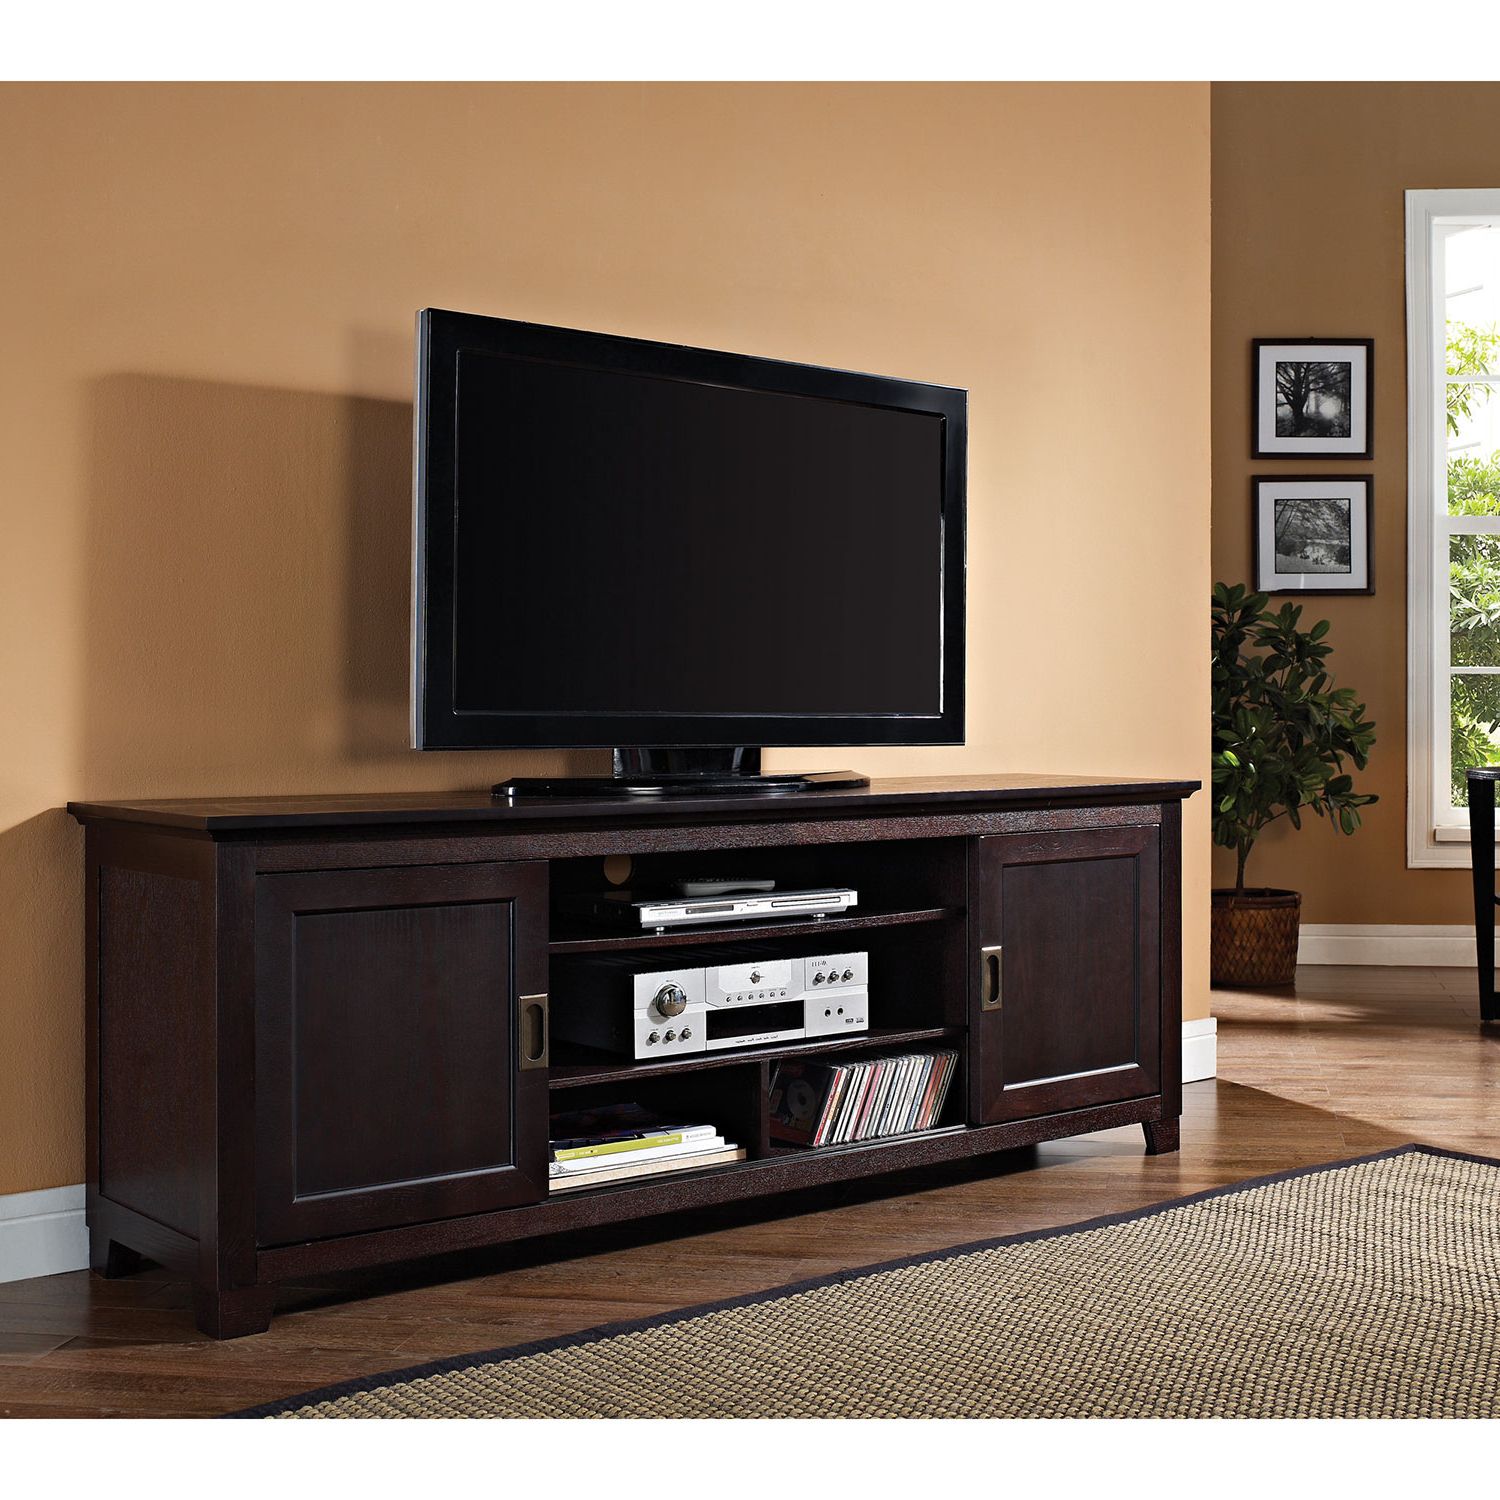 Annabelle Cream 70 Inch Tv Stands Inside Most Recently Released Idyllic Walker Edison Tv Stand Espresso Tv Stands Canada To Dark (View 7 of 20)